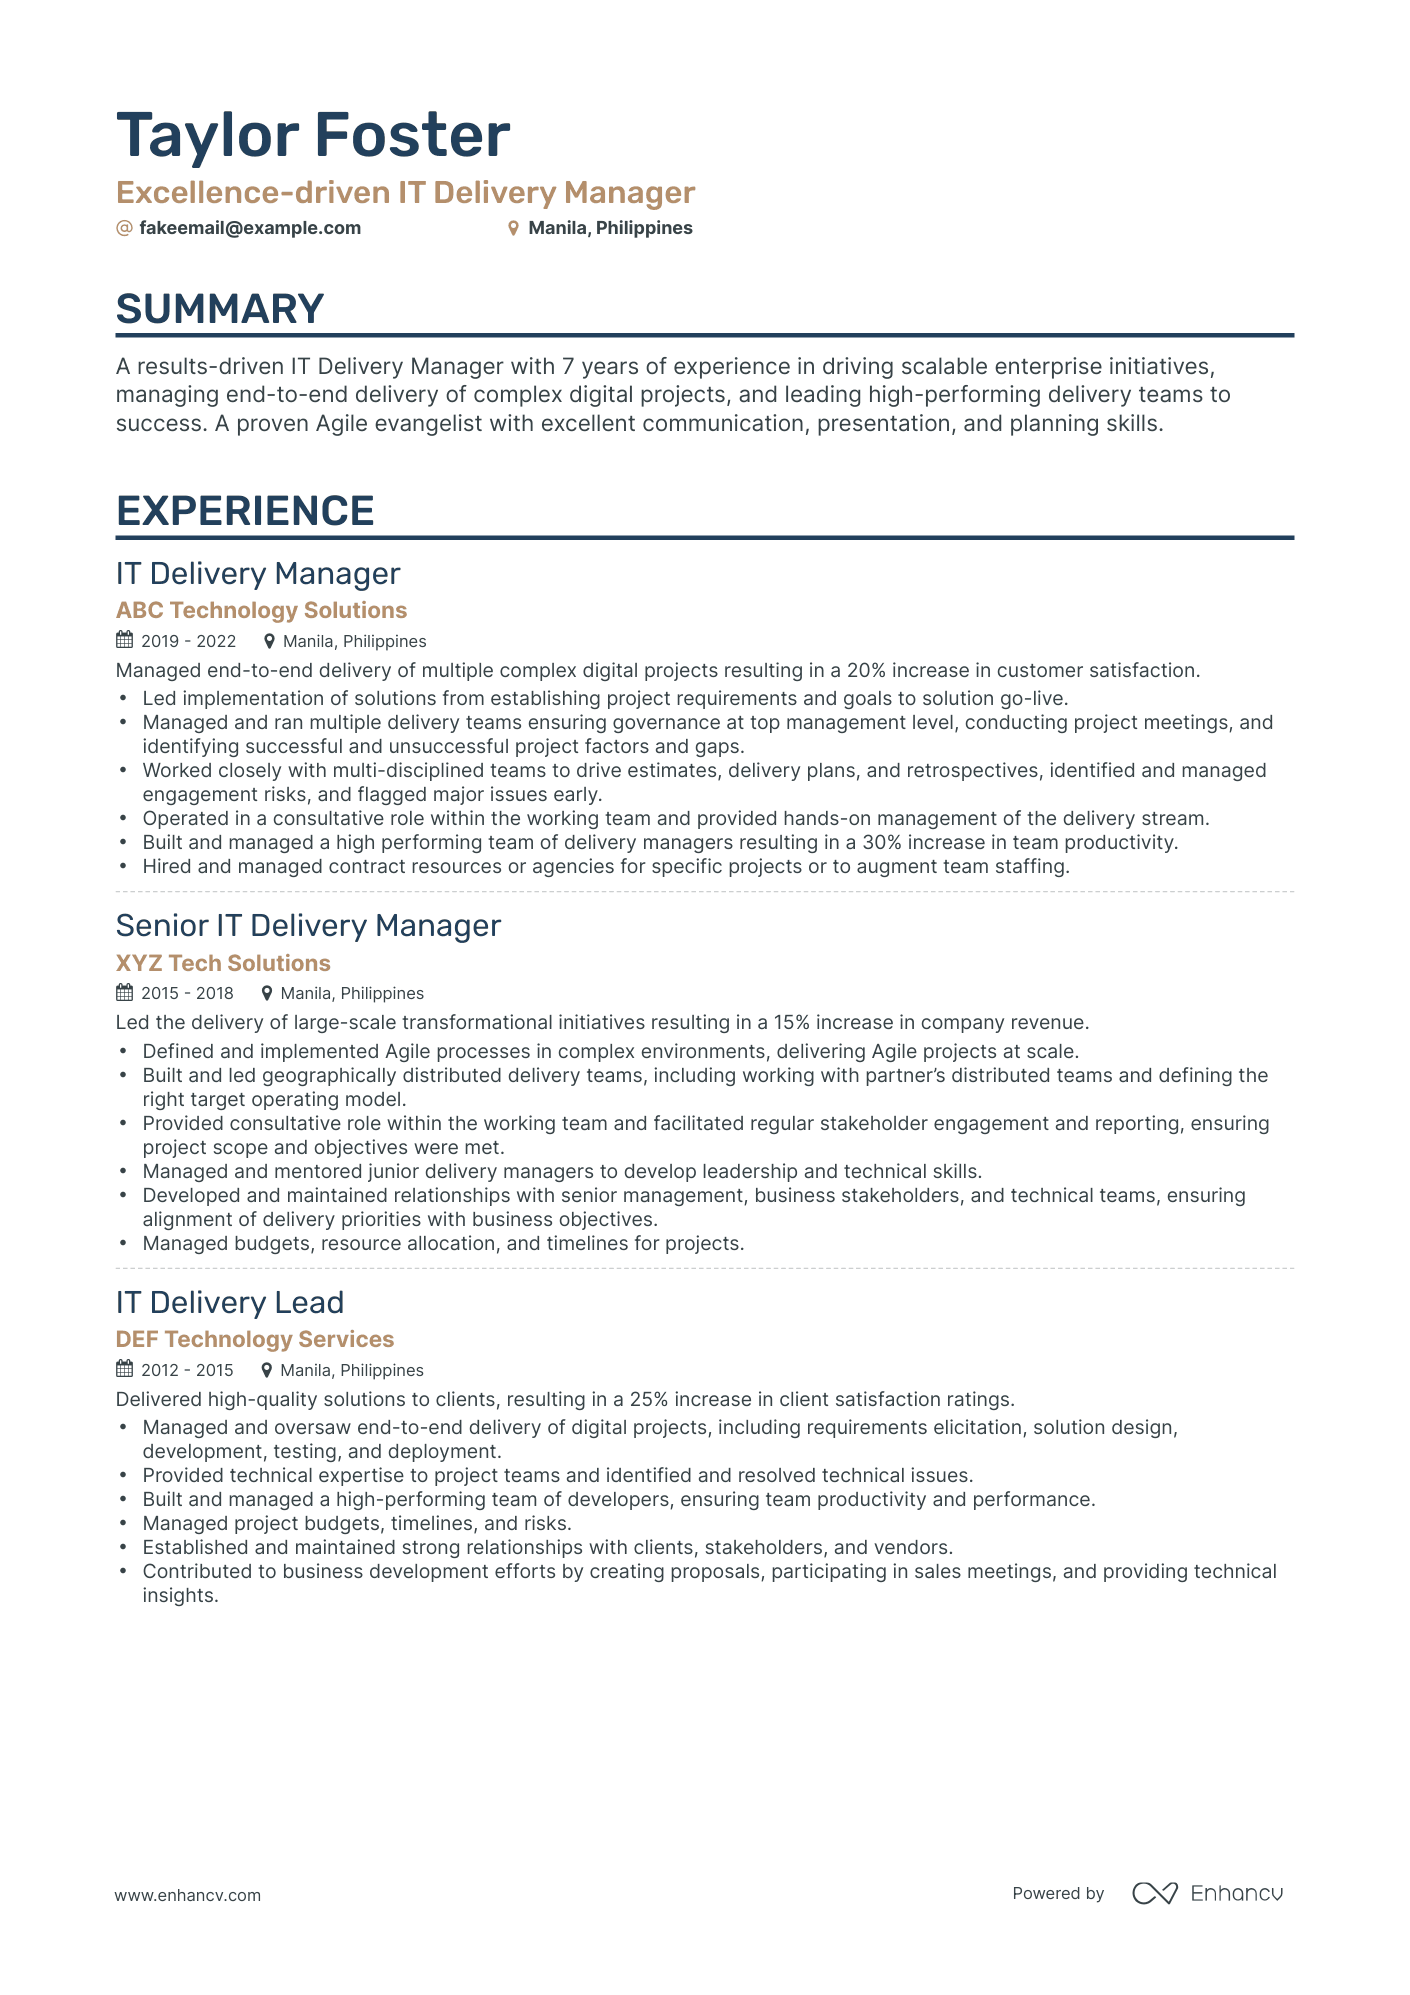 Classic IT Delivery Manager Resume Template